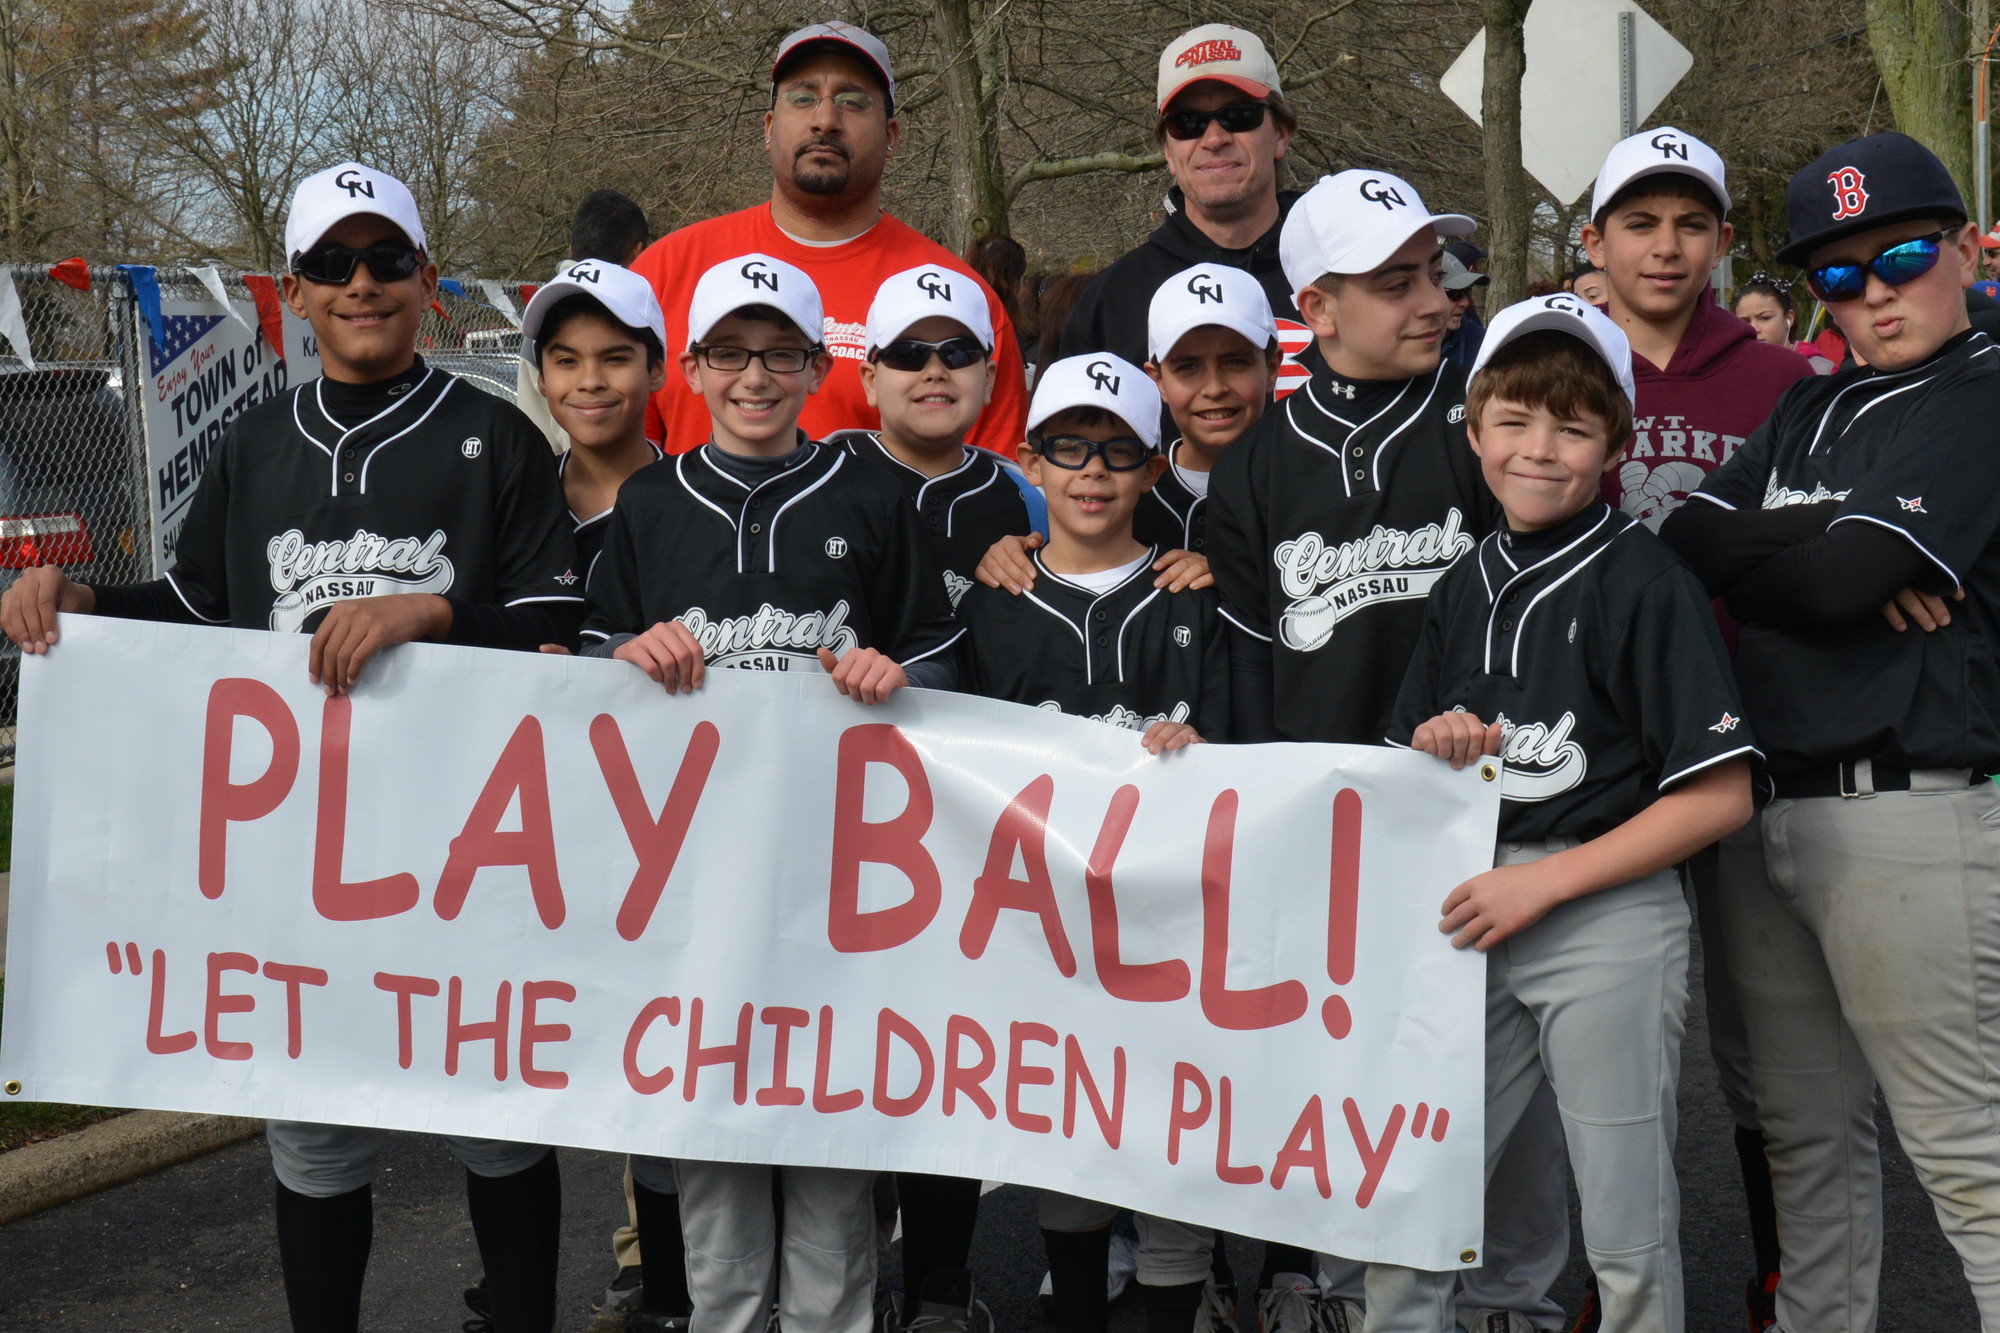 It was time to “Play ball!” in Salisbury last Saturday as little leaguers marched down Carman Avenue to commence the 2013 season.